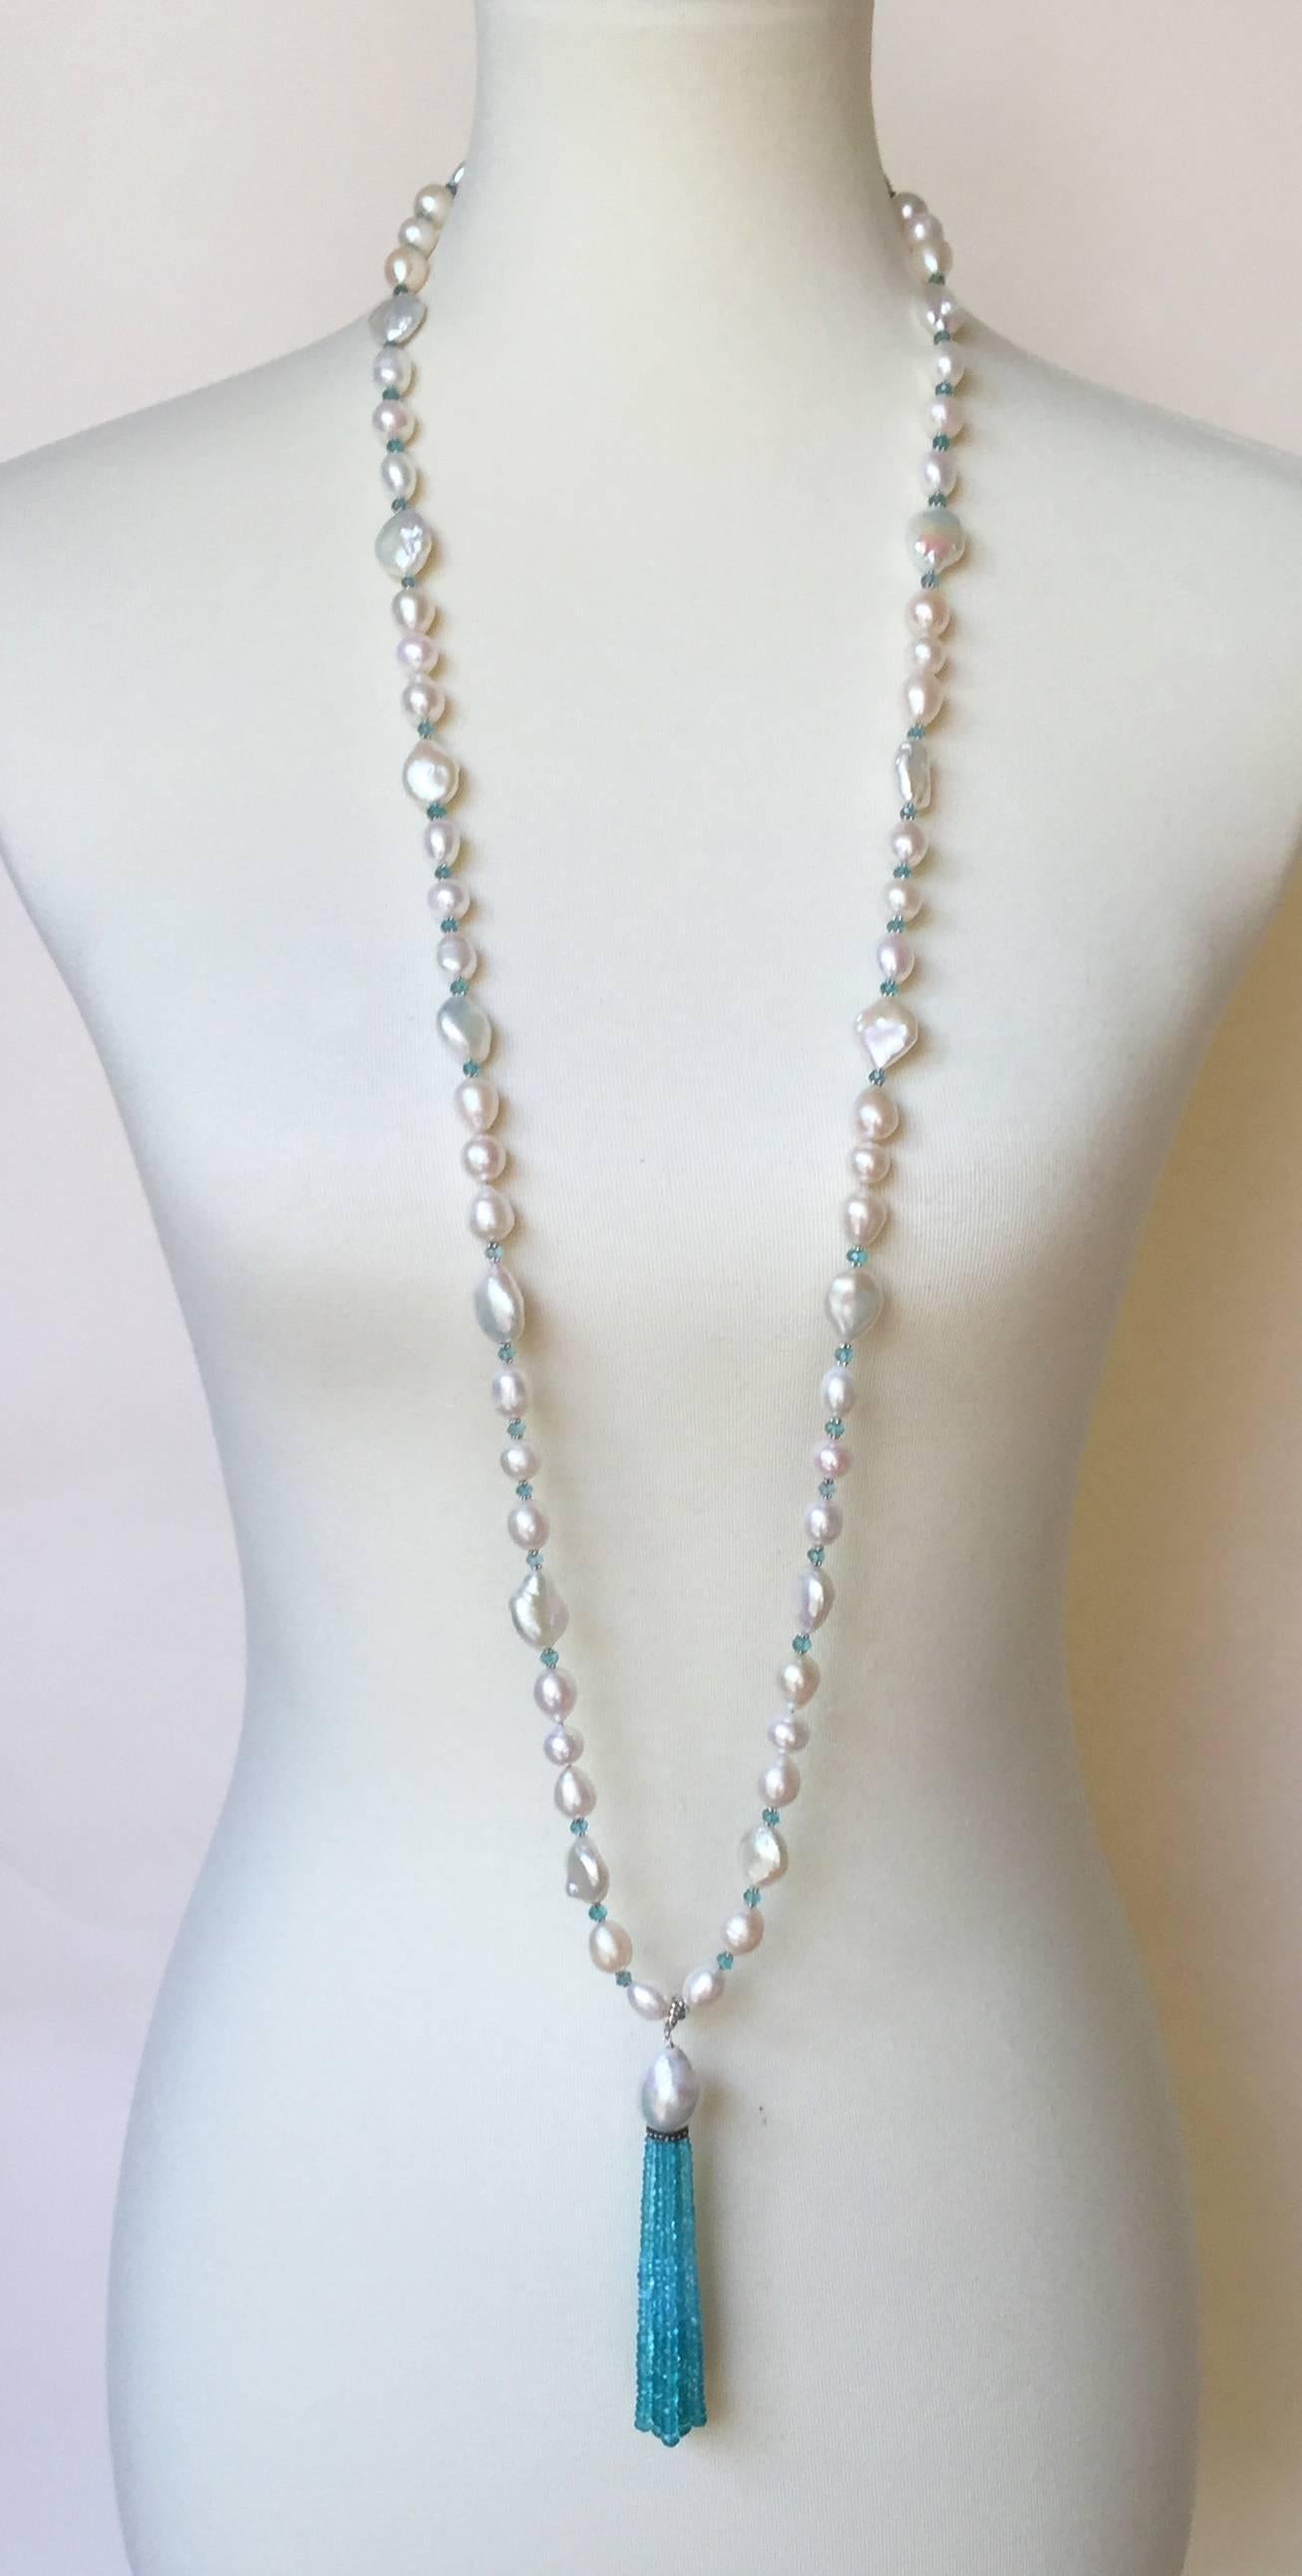  Marina J has carefully crafted the composition of these baroque pearls to create a pattern based on the shape and size of each pearl, adding a nuanced elegance to the necklace. To highlight the lushness of the pearls, blue topaz faceted beads and